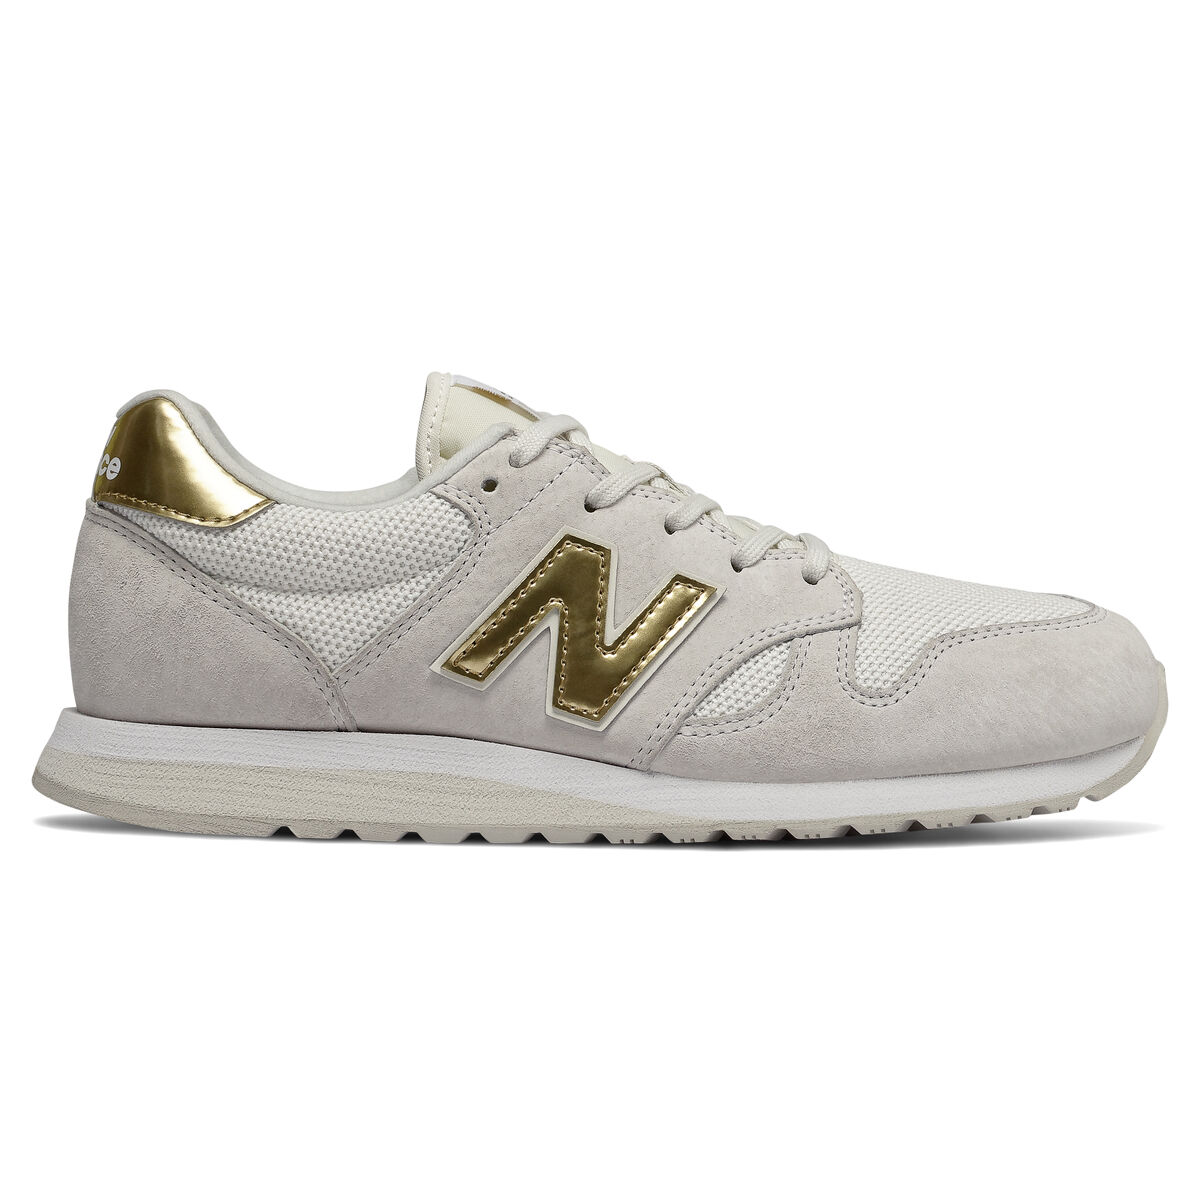 new balance women's casual shoes